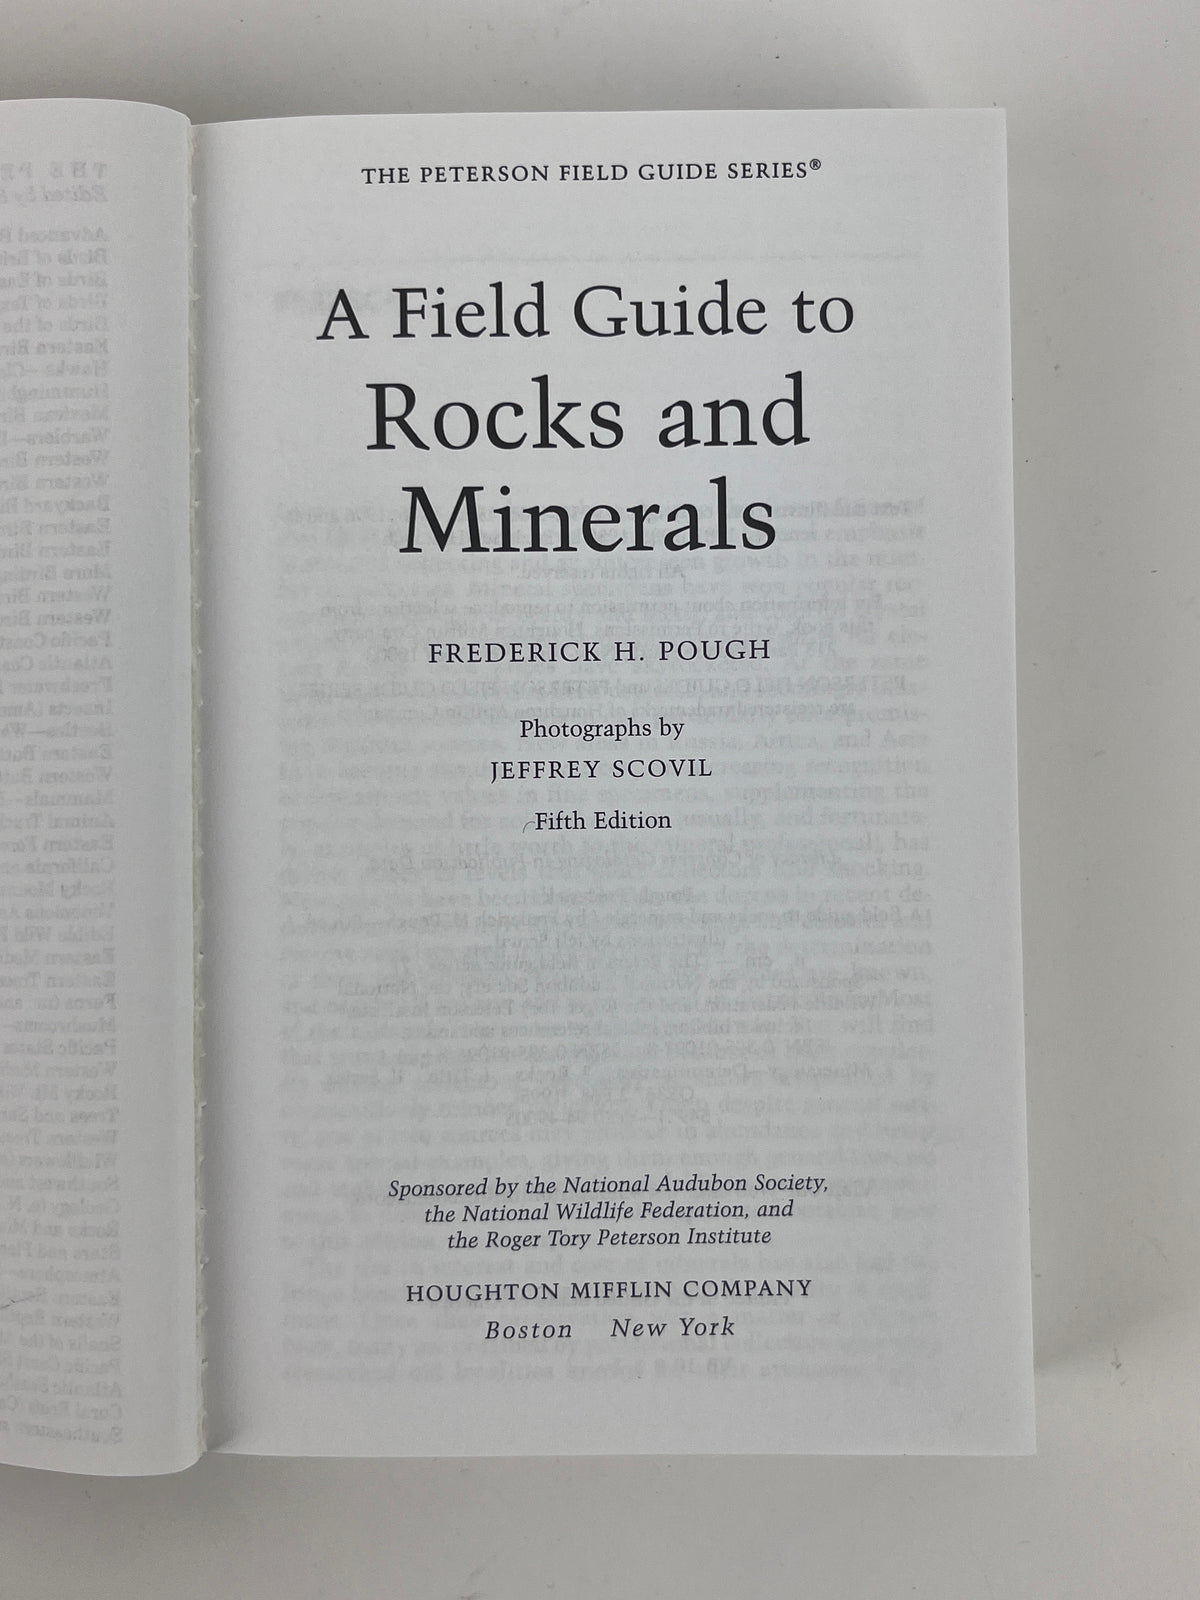 Rocks and Minerals Field Guide